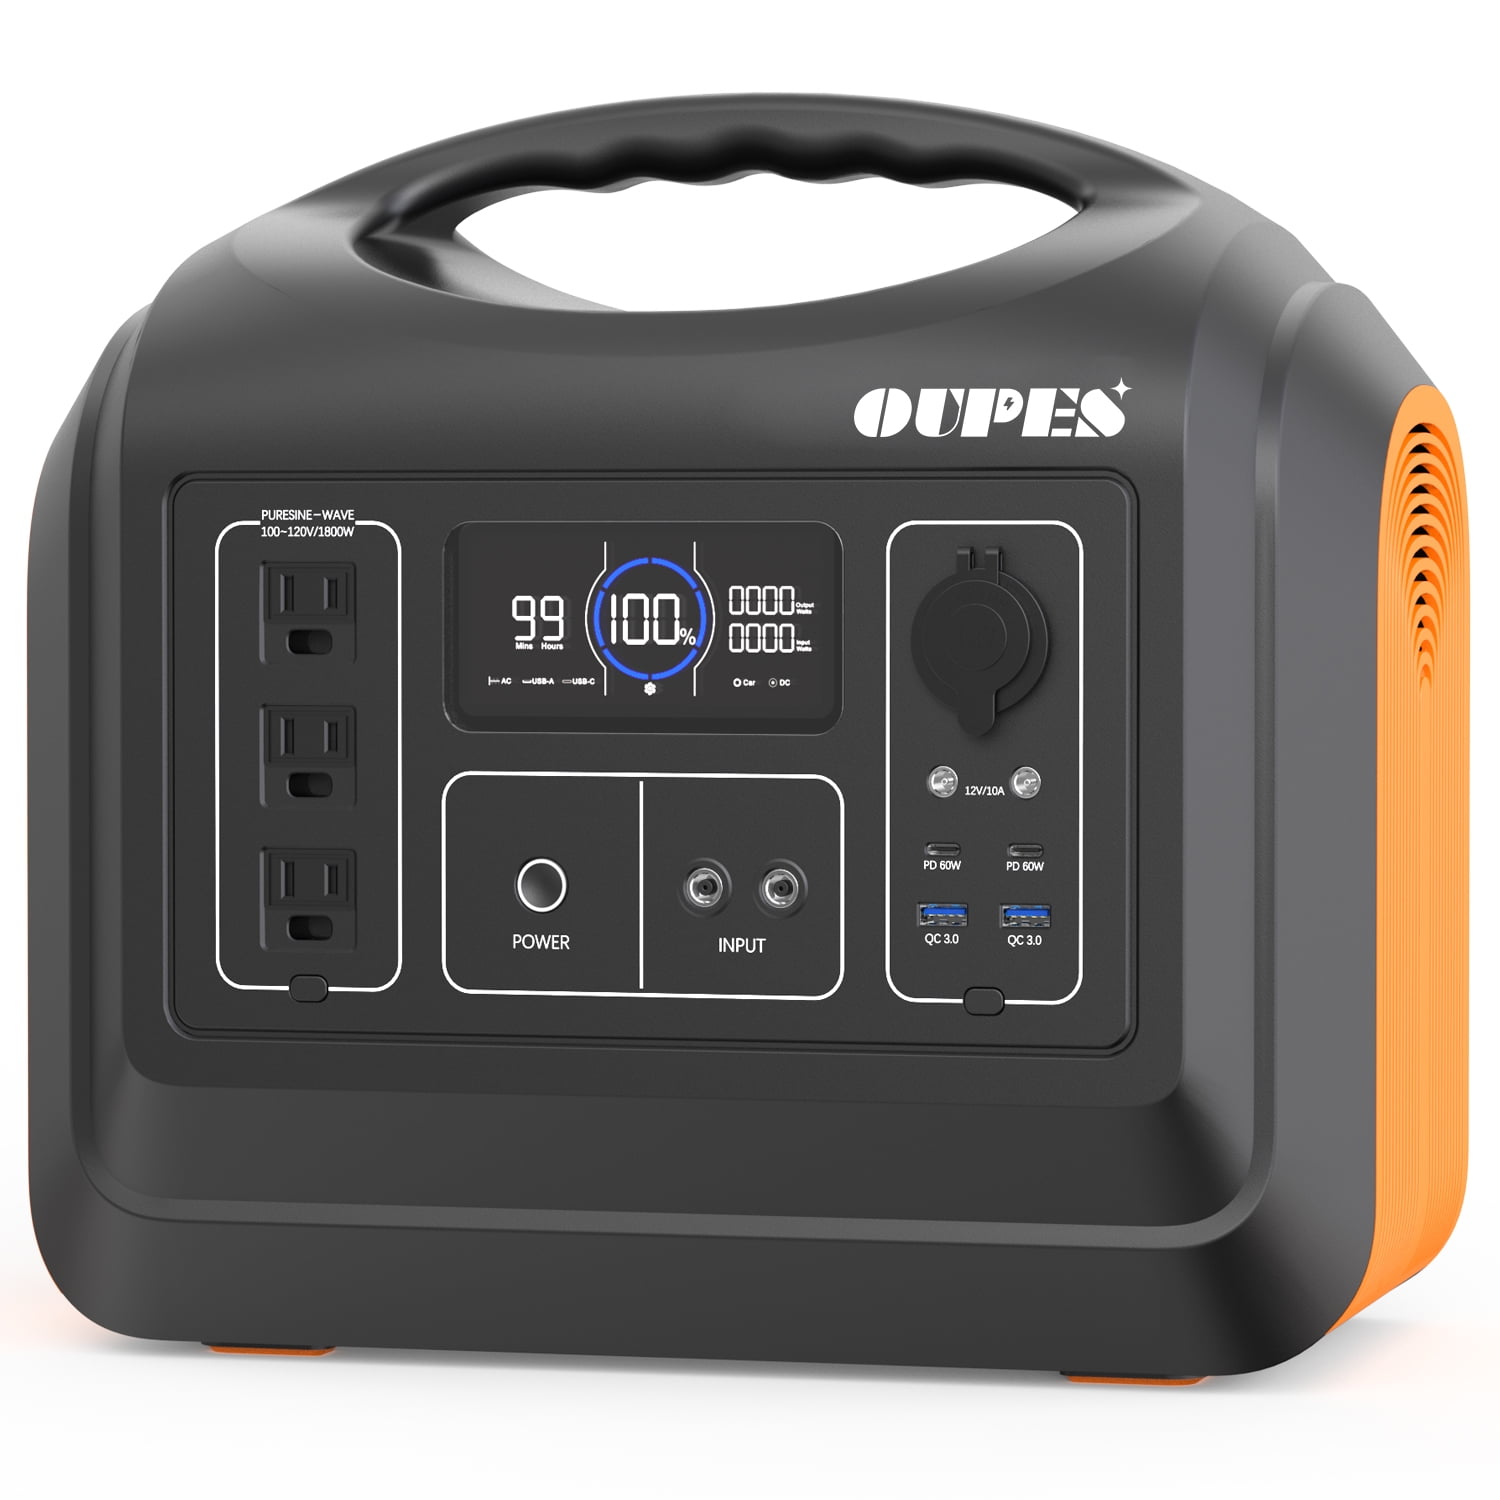 Solar Battery OUPES Portable Power Generator (4000W Use, LiFePO4 Peak), 4000+ 1800W Backup for Station, with Outlets Camping mAh) 3 AC (465000 Home Cycle 1488Wh